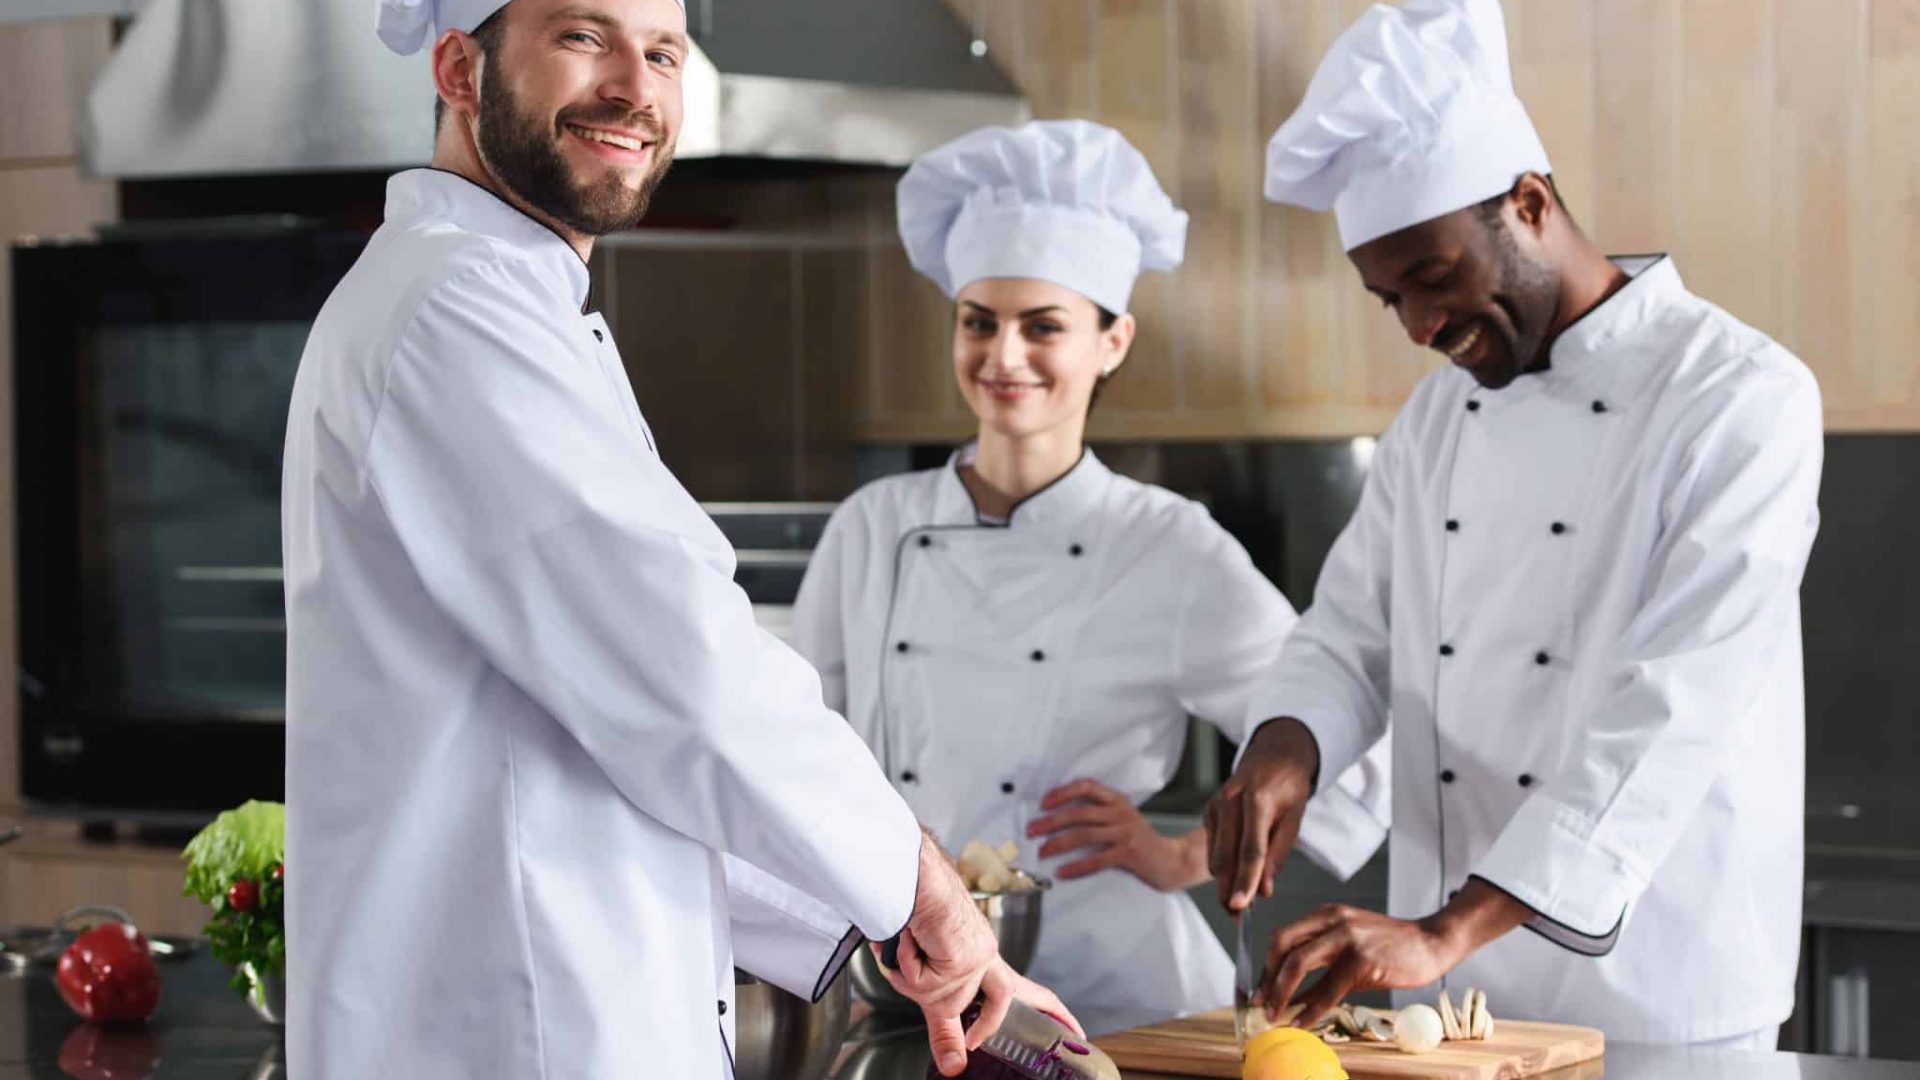 Diverse team of cooks smiling while cutting ingredients by kitchen table